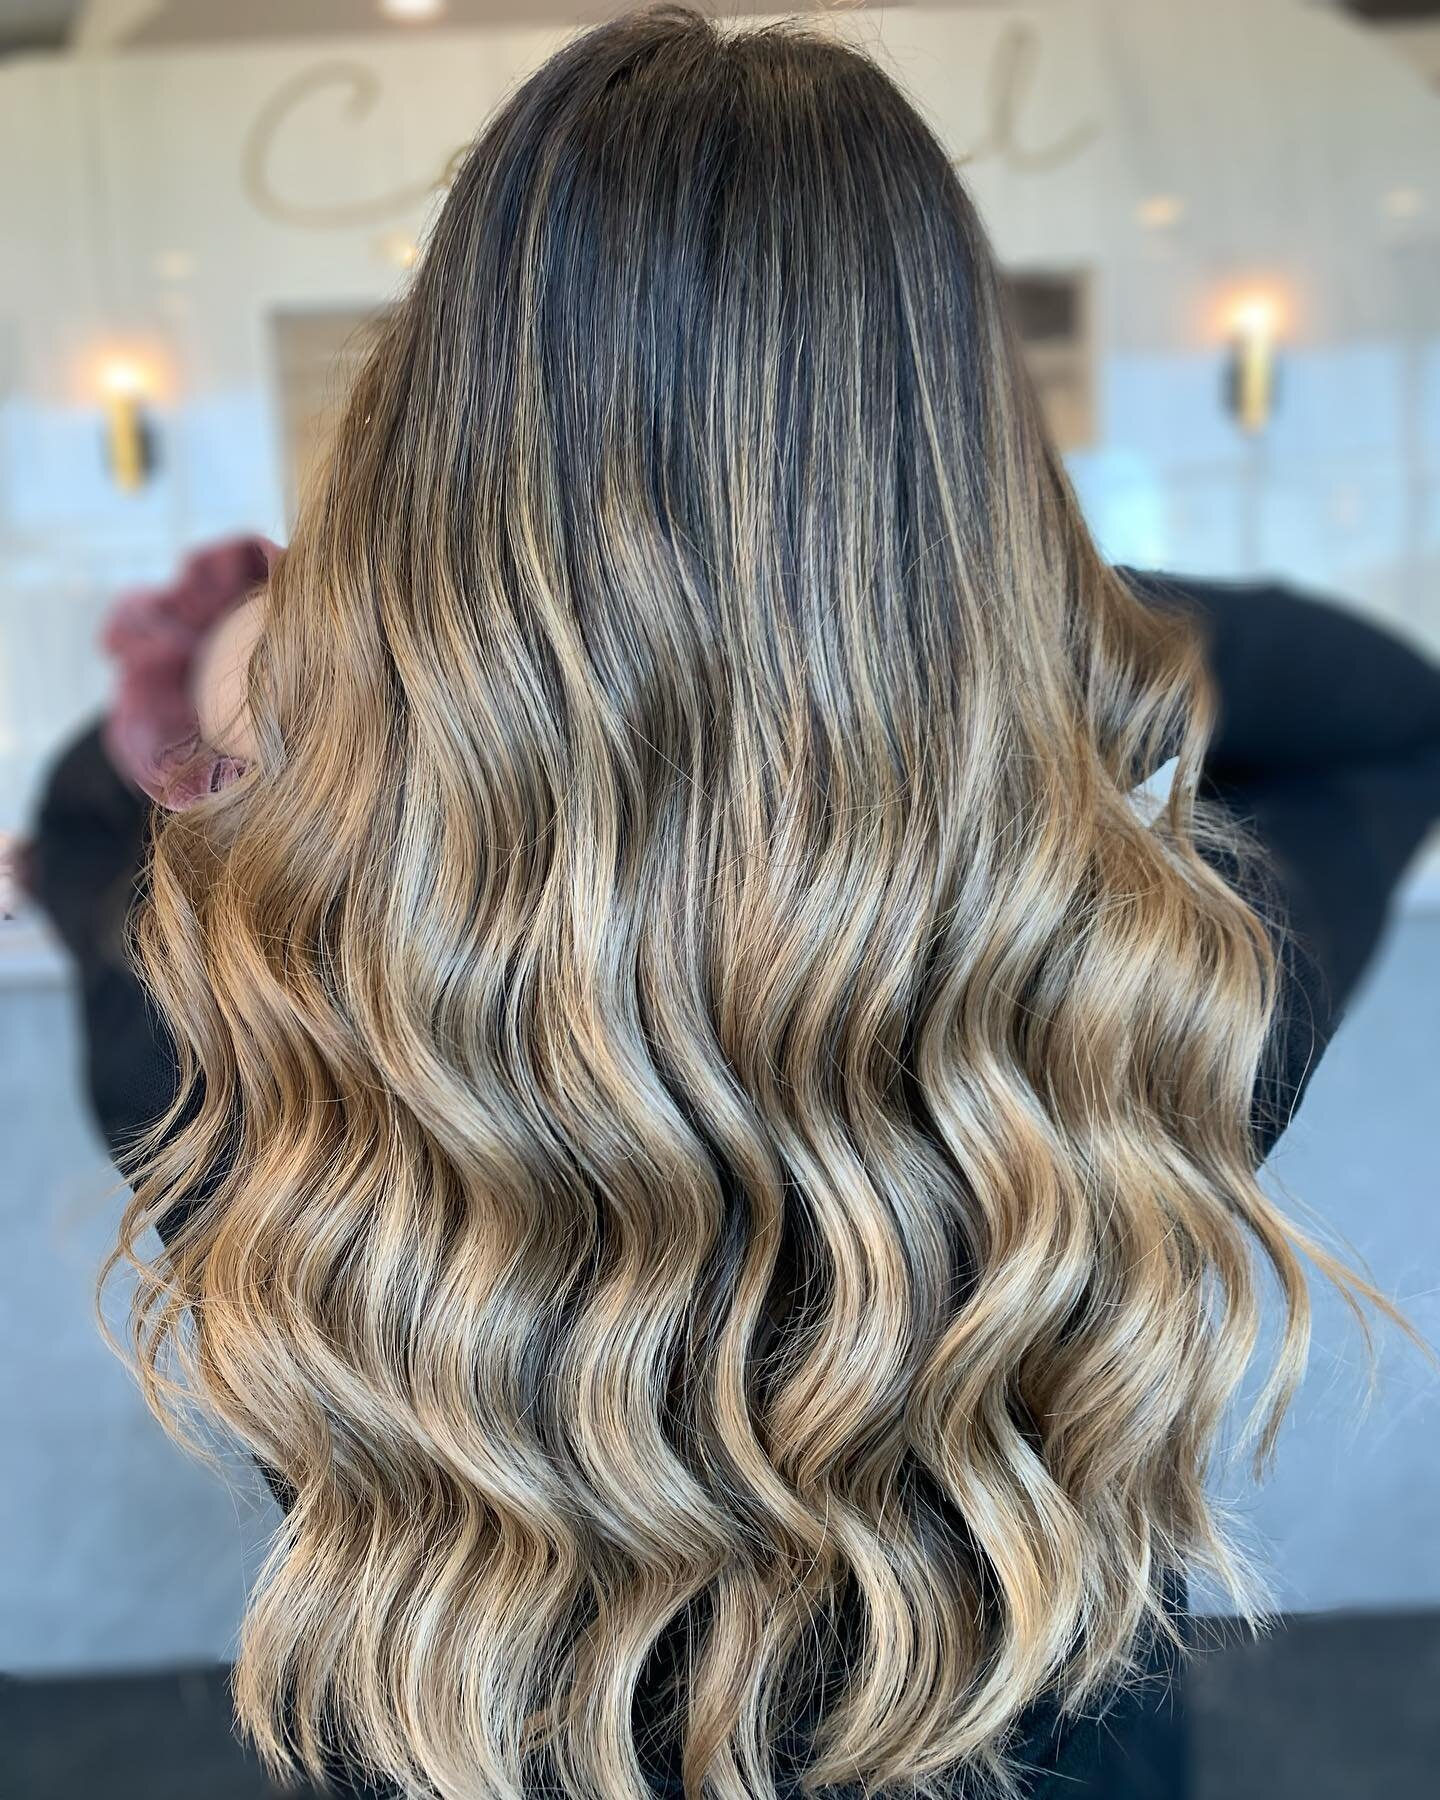 Obsessed with this balayage!!🤤 by @hair.by.kayyla 
.
.
.
#centralhairsalon #centralofattention #kingcity #kingcityhairsalon #brondebalayage #balayageartists #balayageobsessed #bestofbalayage #framar #pinterest #hairinspo #hairtrends2021 #trendy #beh